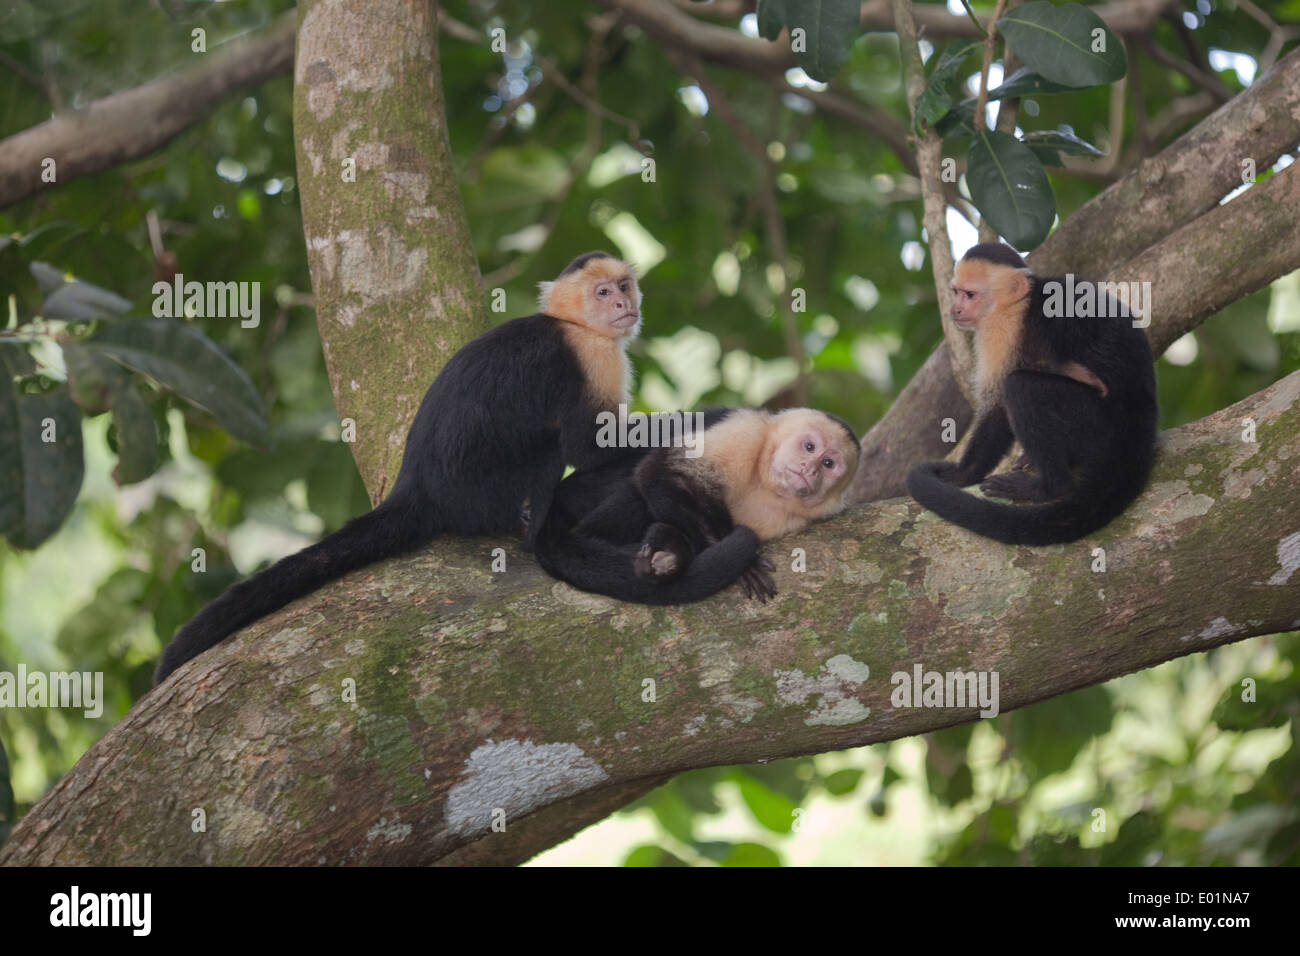 White-faced Capuchin Monkeys (Cebus capucinus). Resting and grooming. Tropical dry forest. Manuel Antonio National Park. Stock Photo